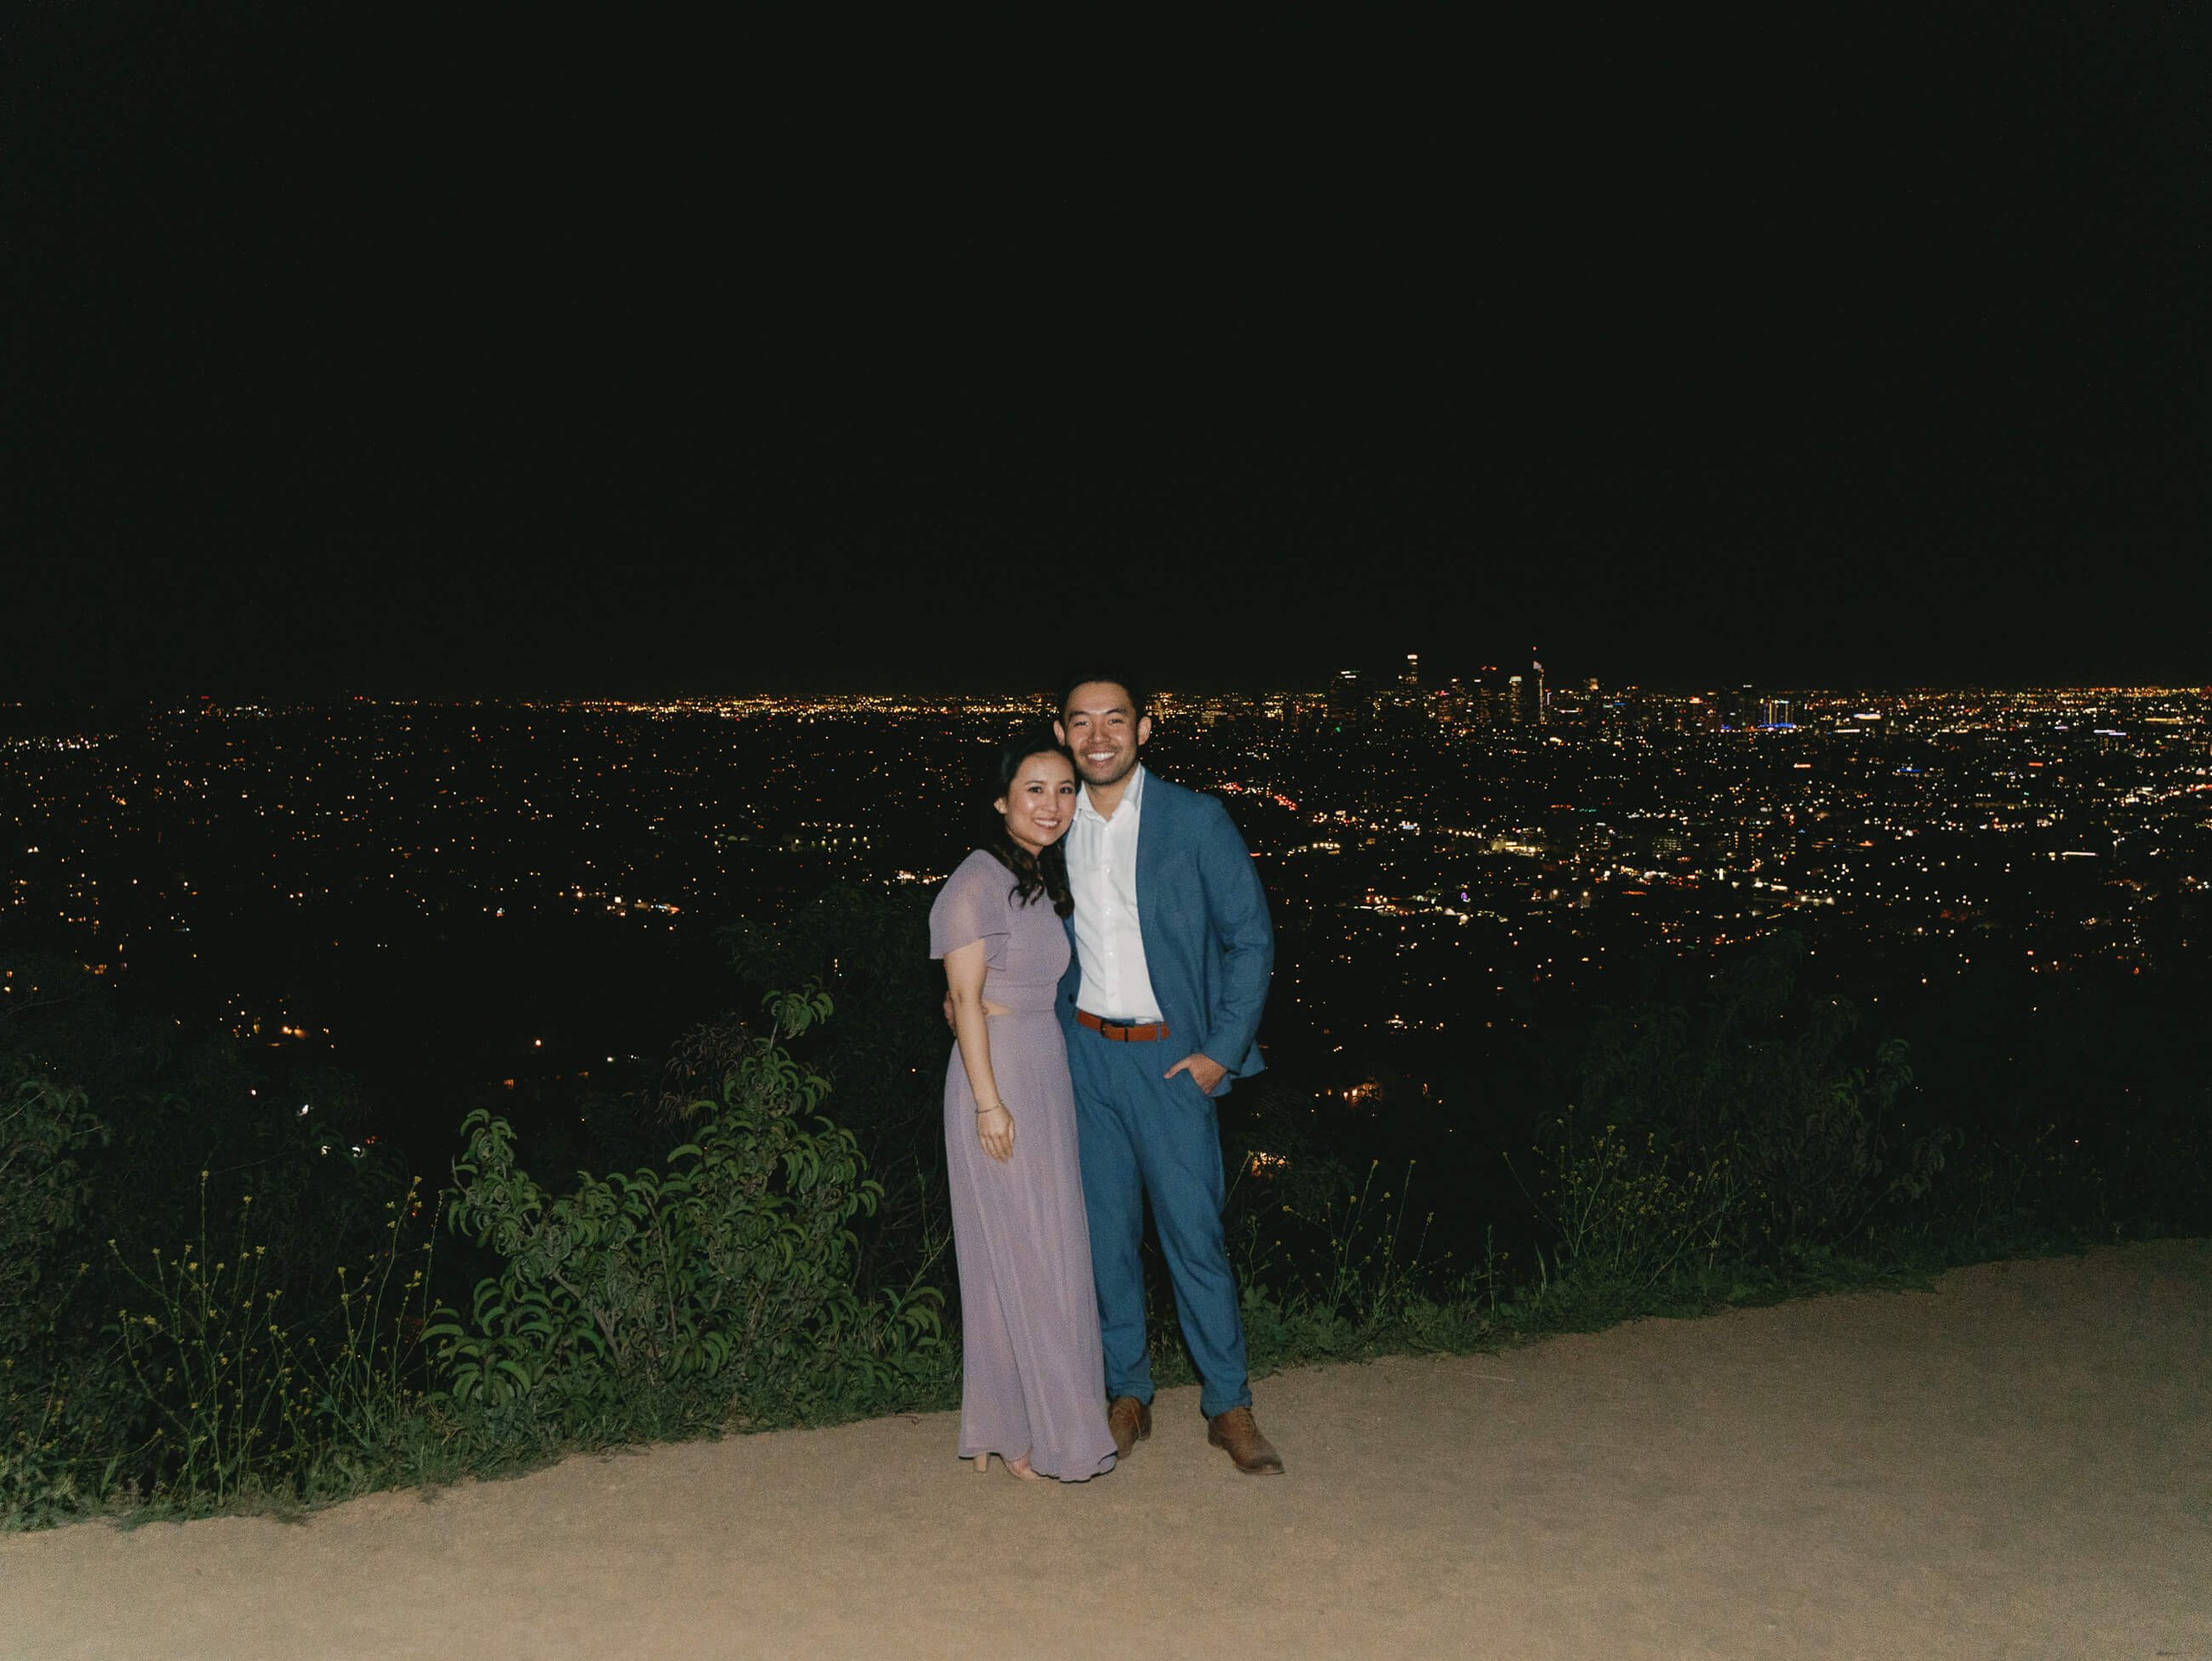 griffith-observatory-engagement-photos-38.jpg